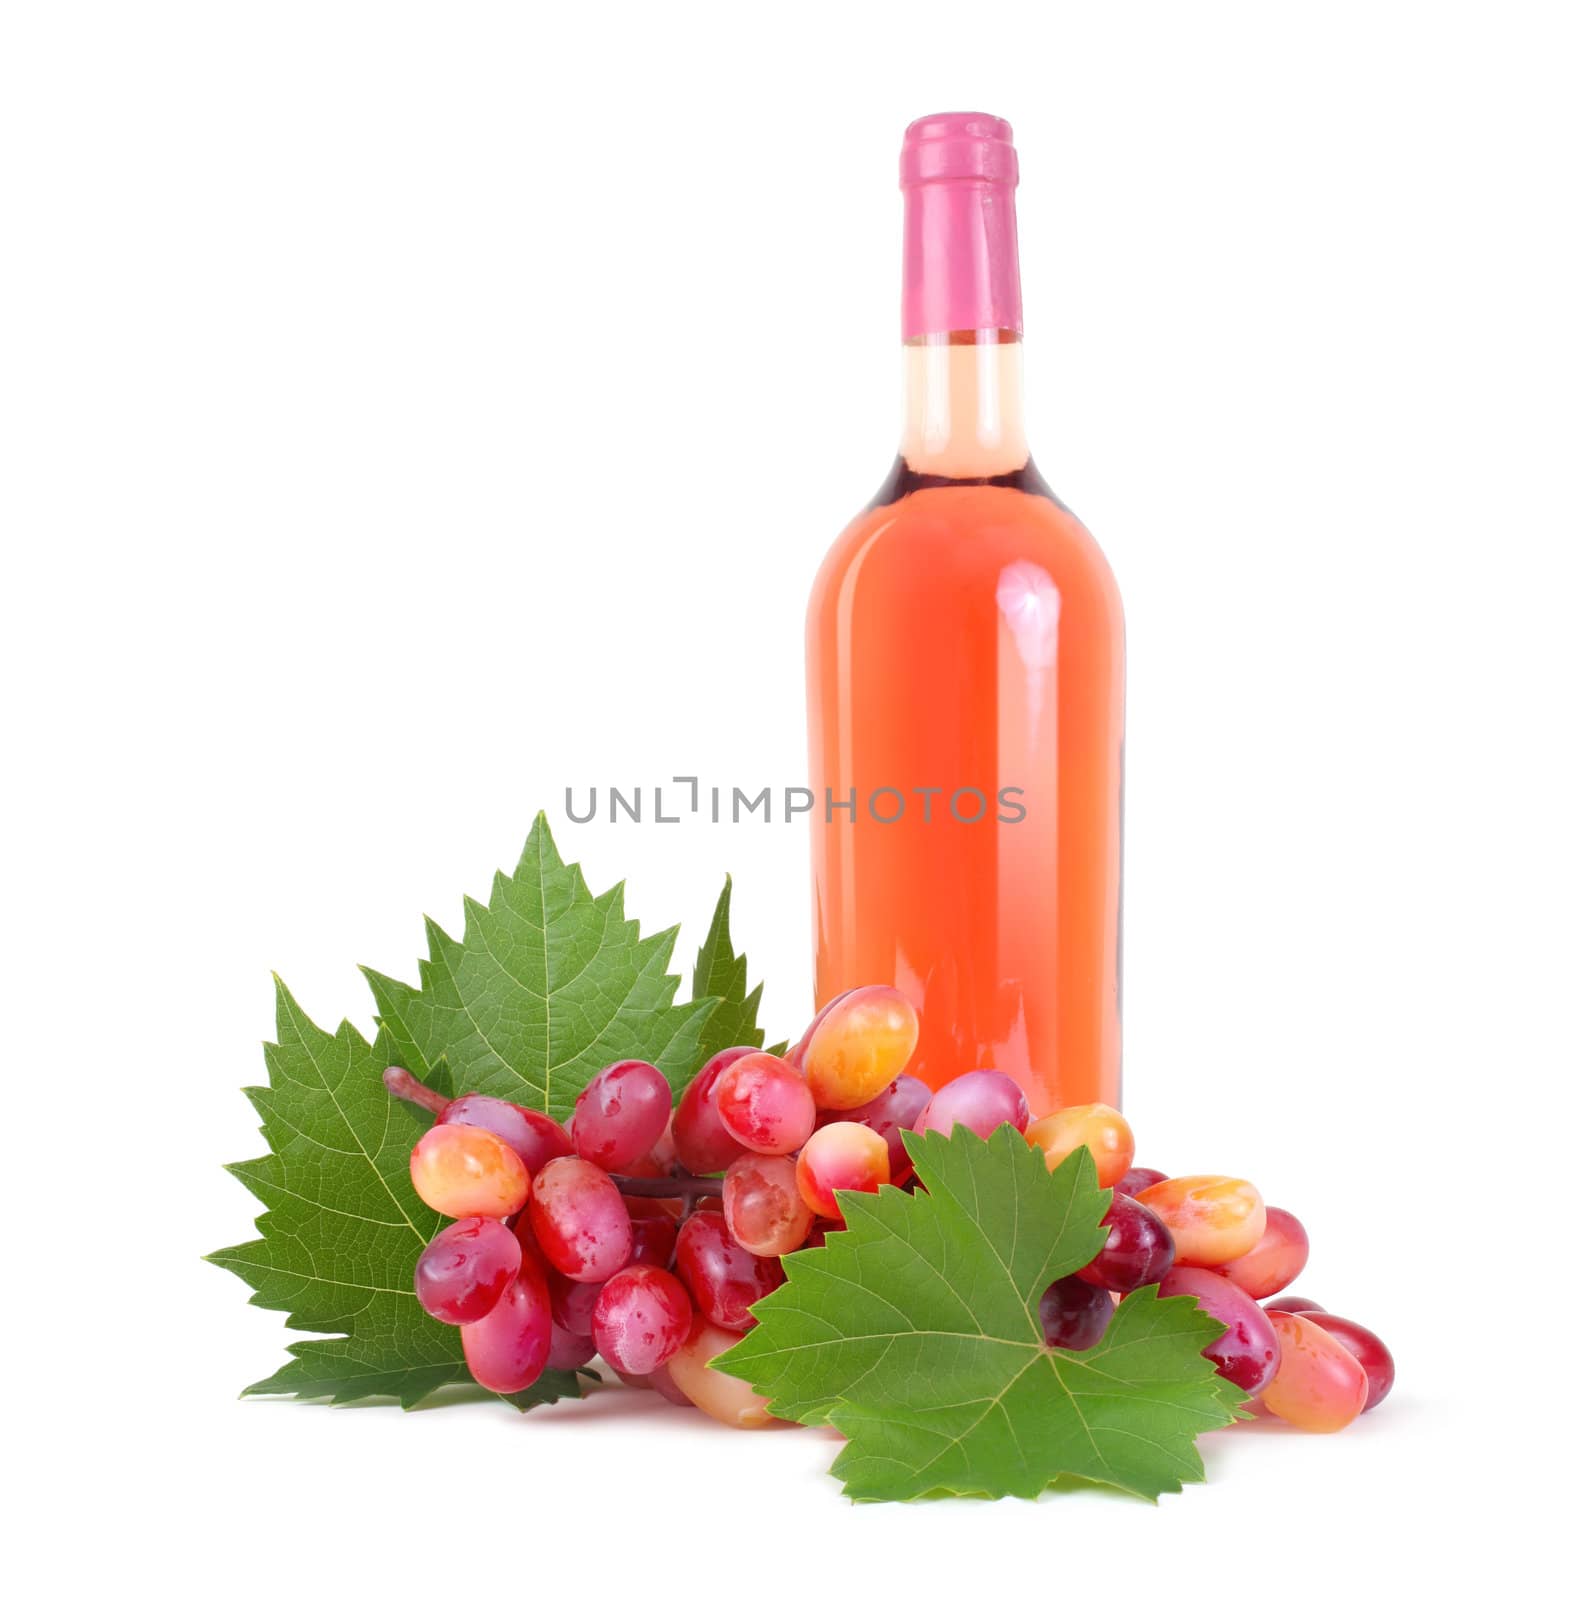 grapes with leaf and rose wine bottle isolated on white